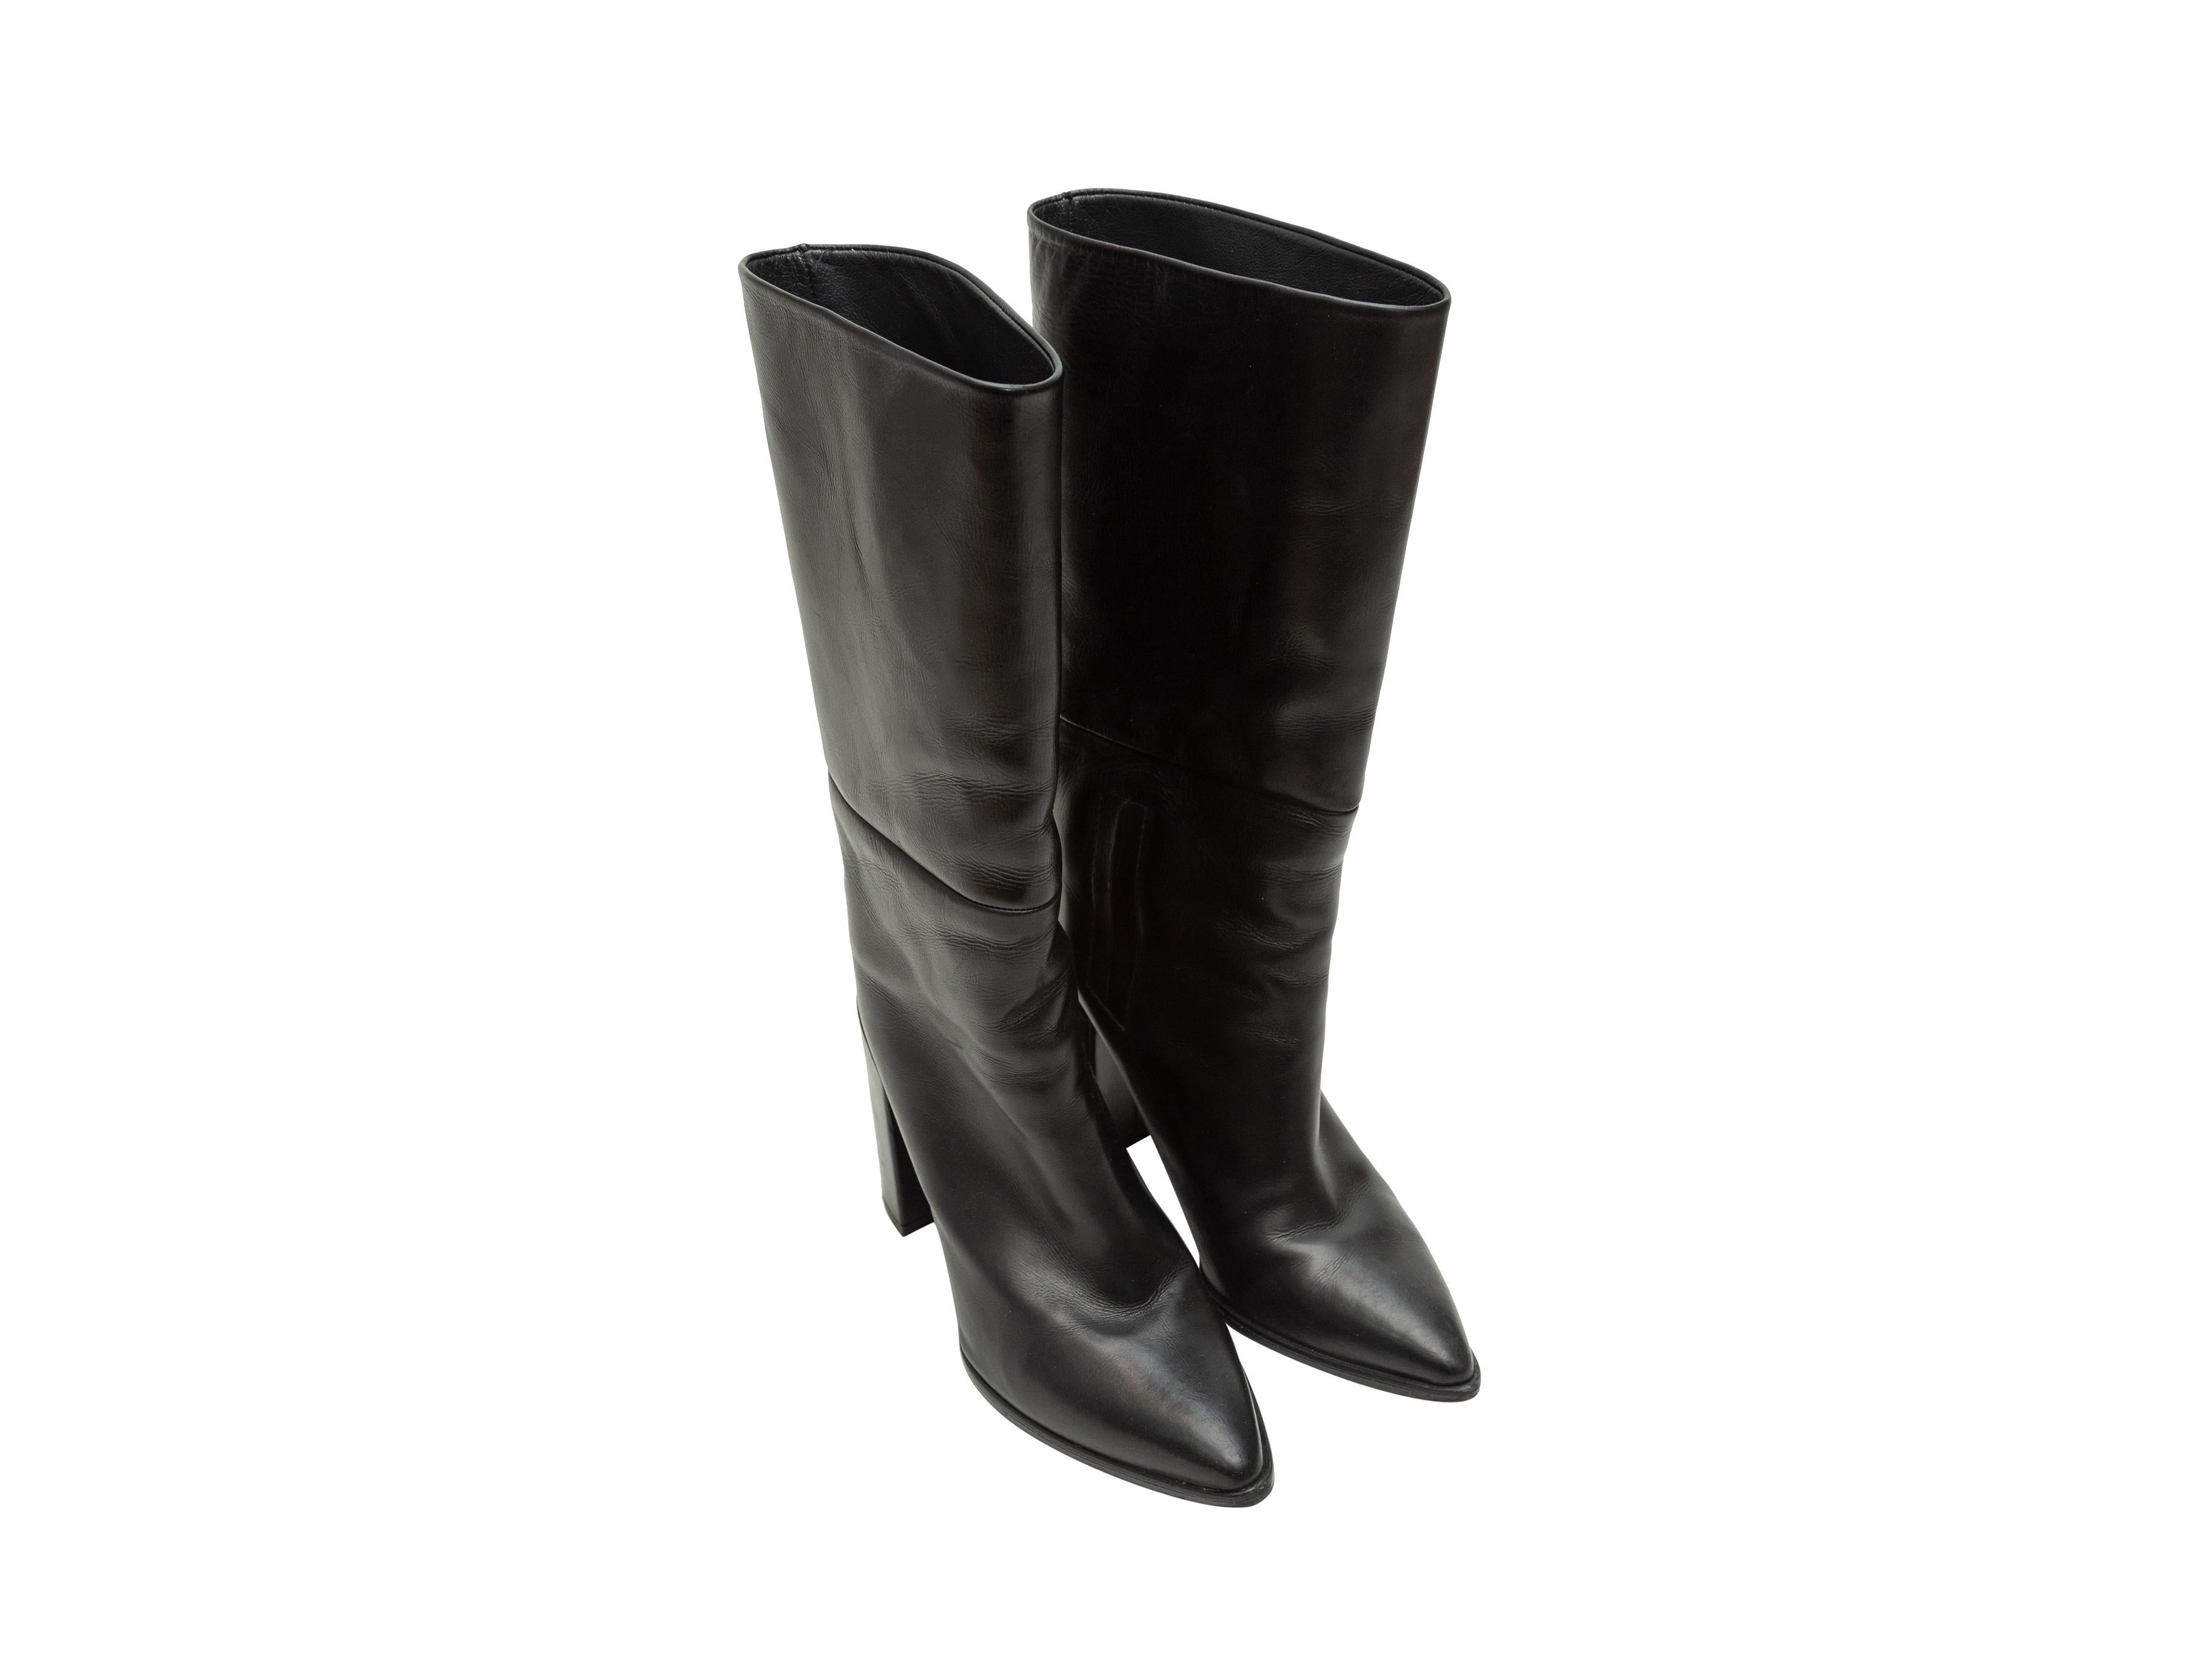 Product details: Black leather mid-calf pointed-toe boots by Stuart Weitzman. Block heels. 4